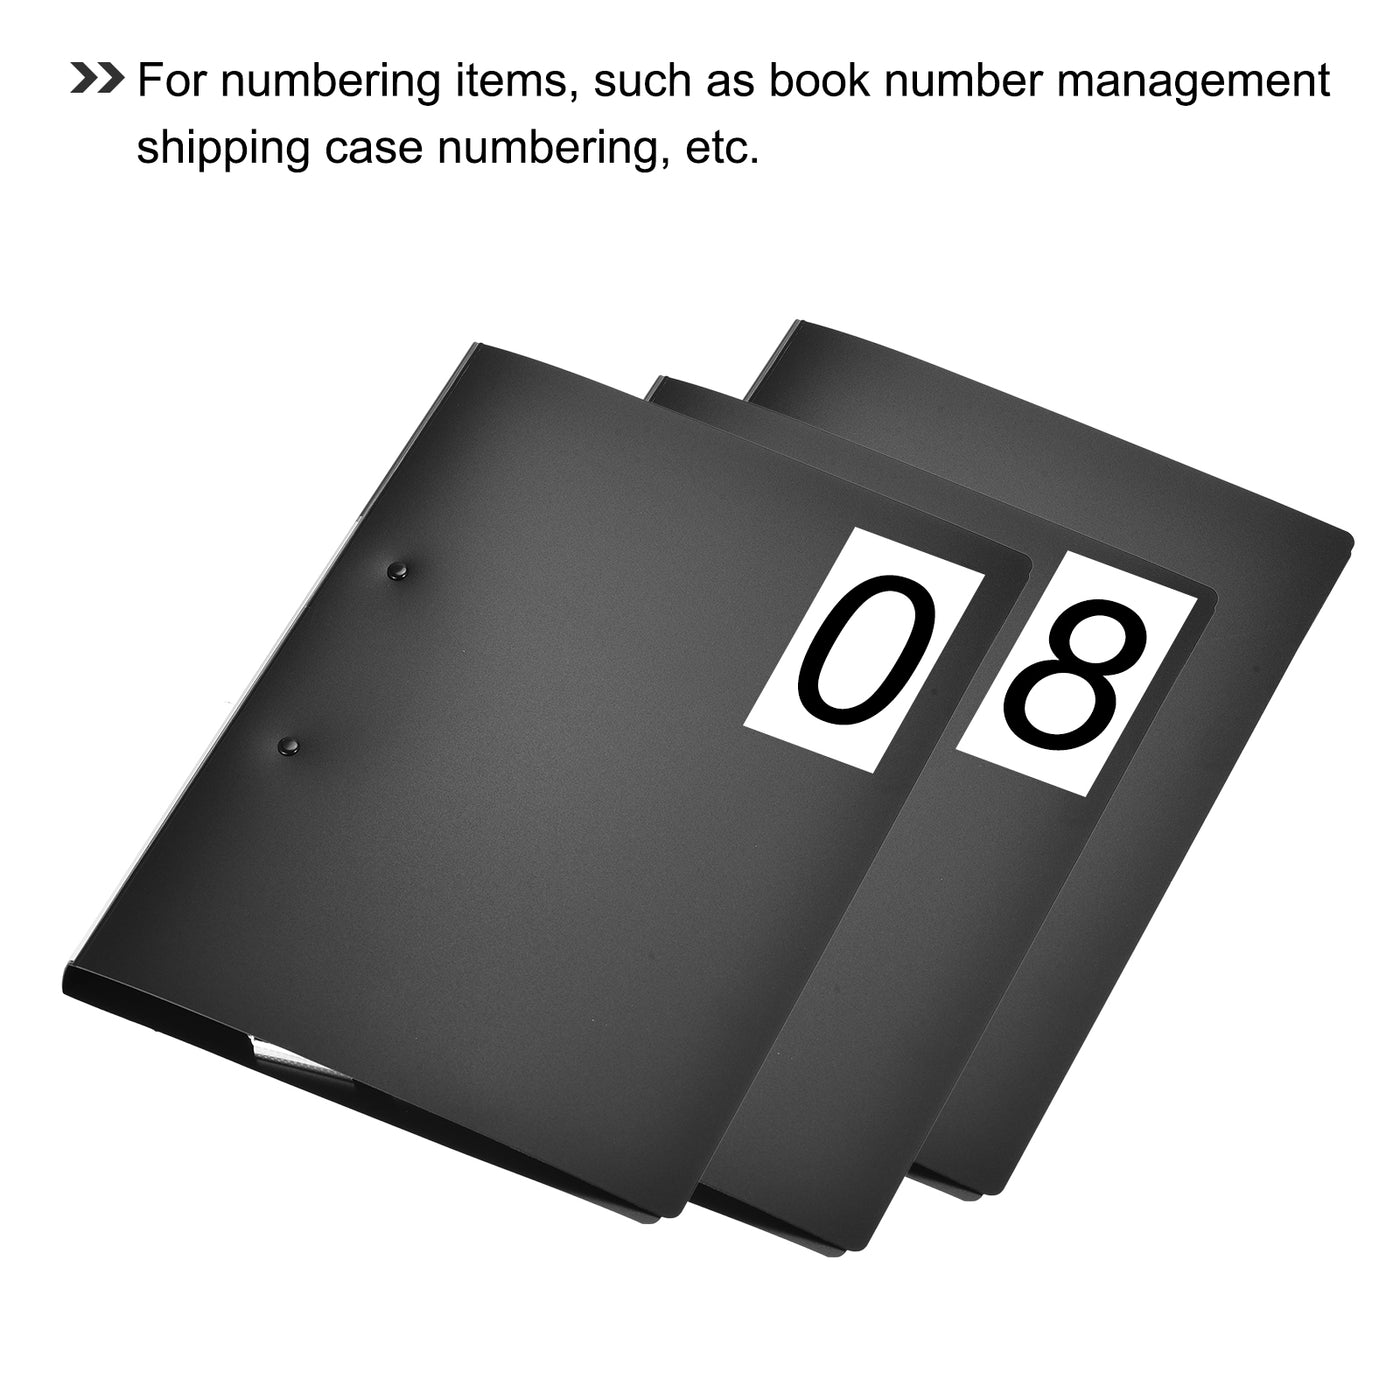 Harfington Mailbox Numbers Sticker Label Number Self Adhesive PVC Vinyl Label 50x25mm for Mailbox Signs, Pack of 15